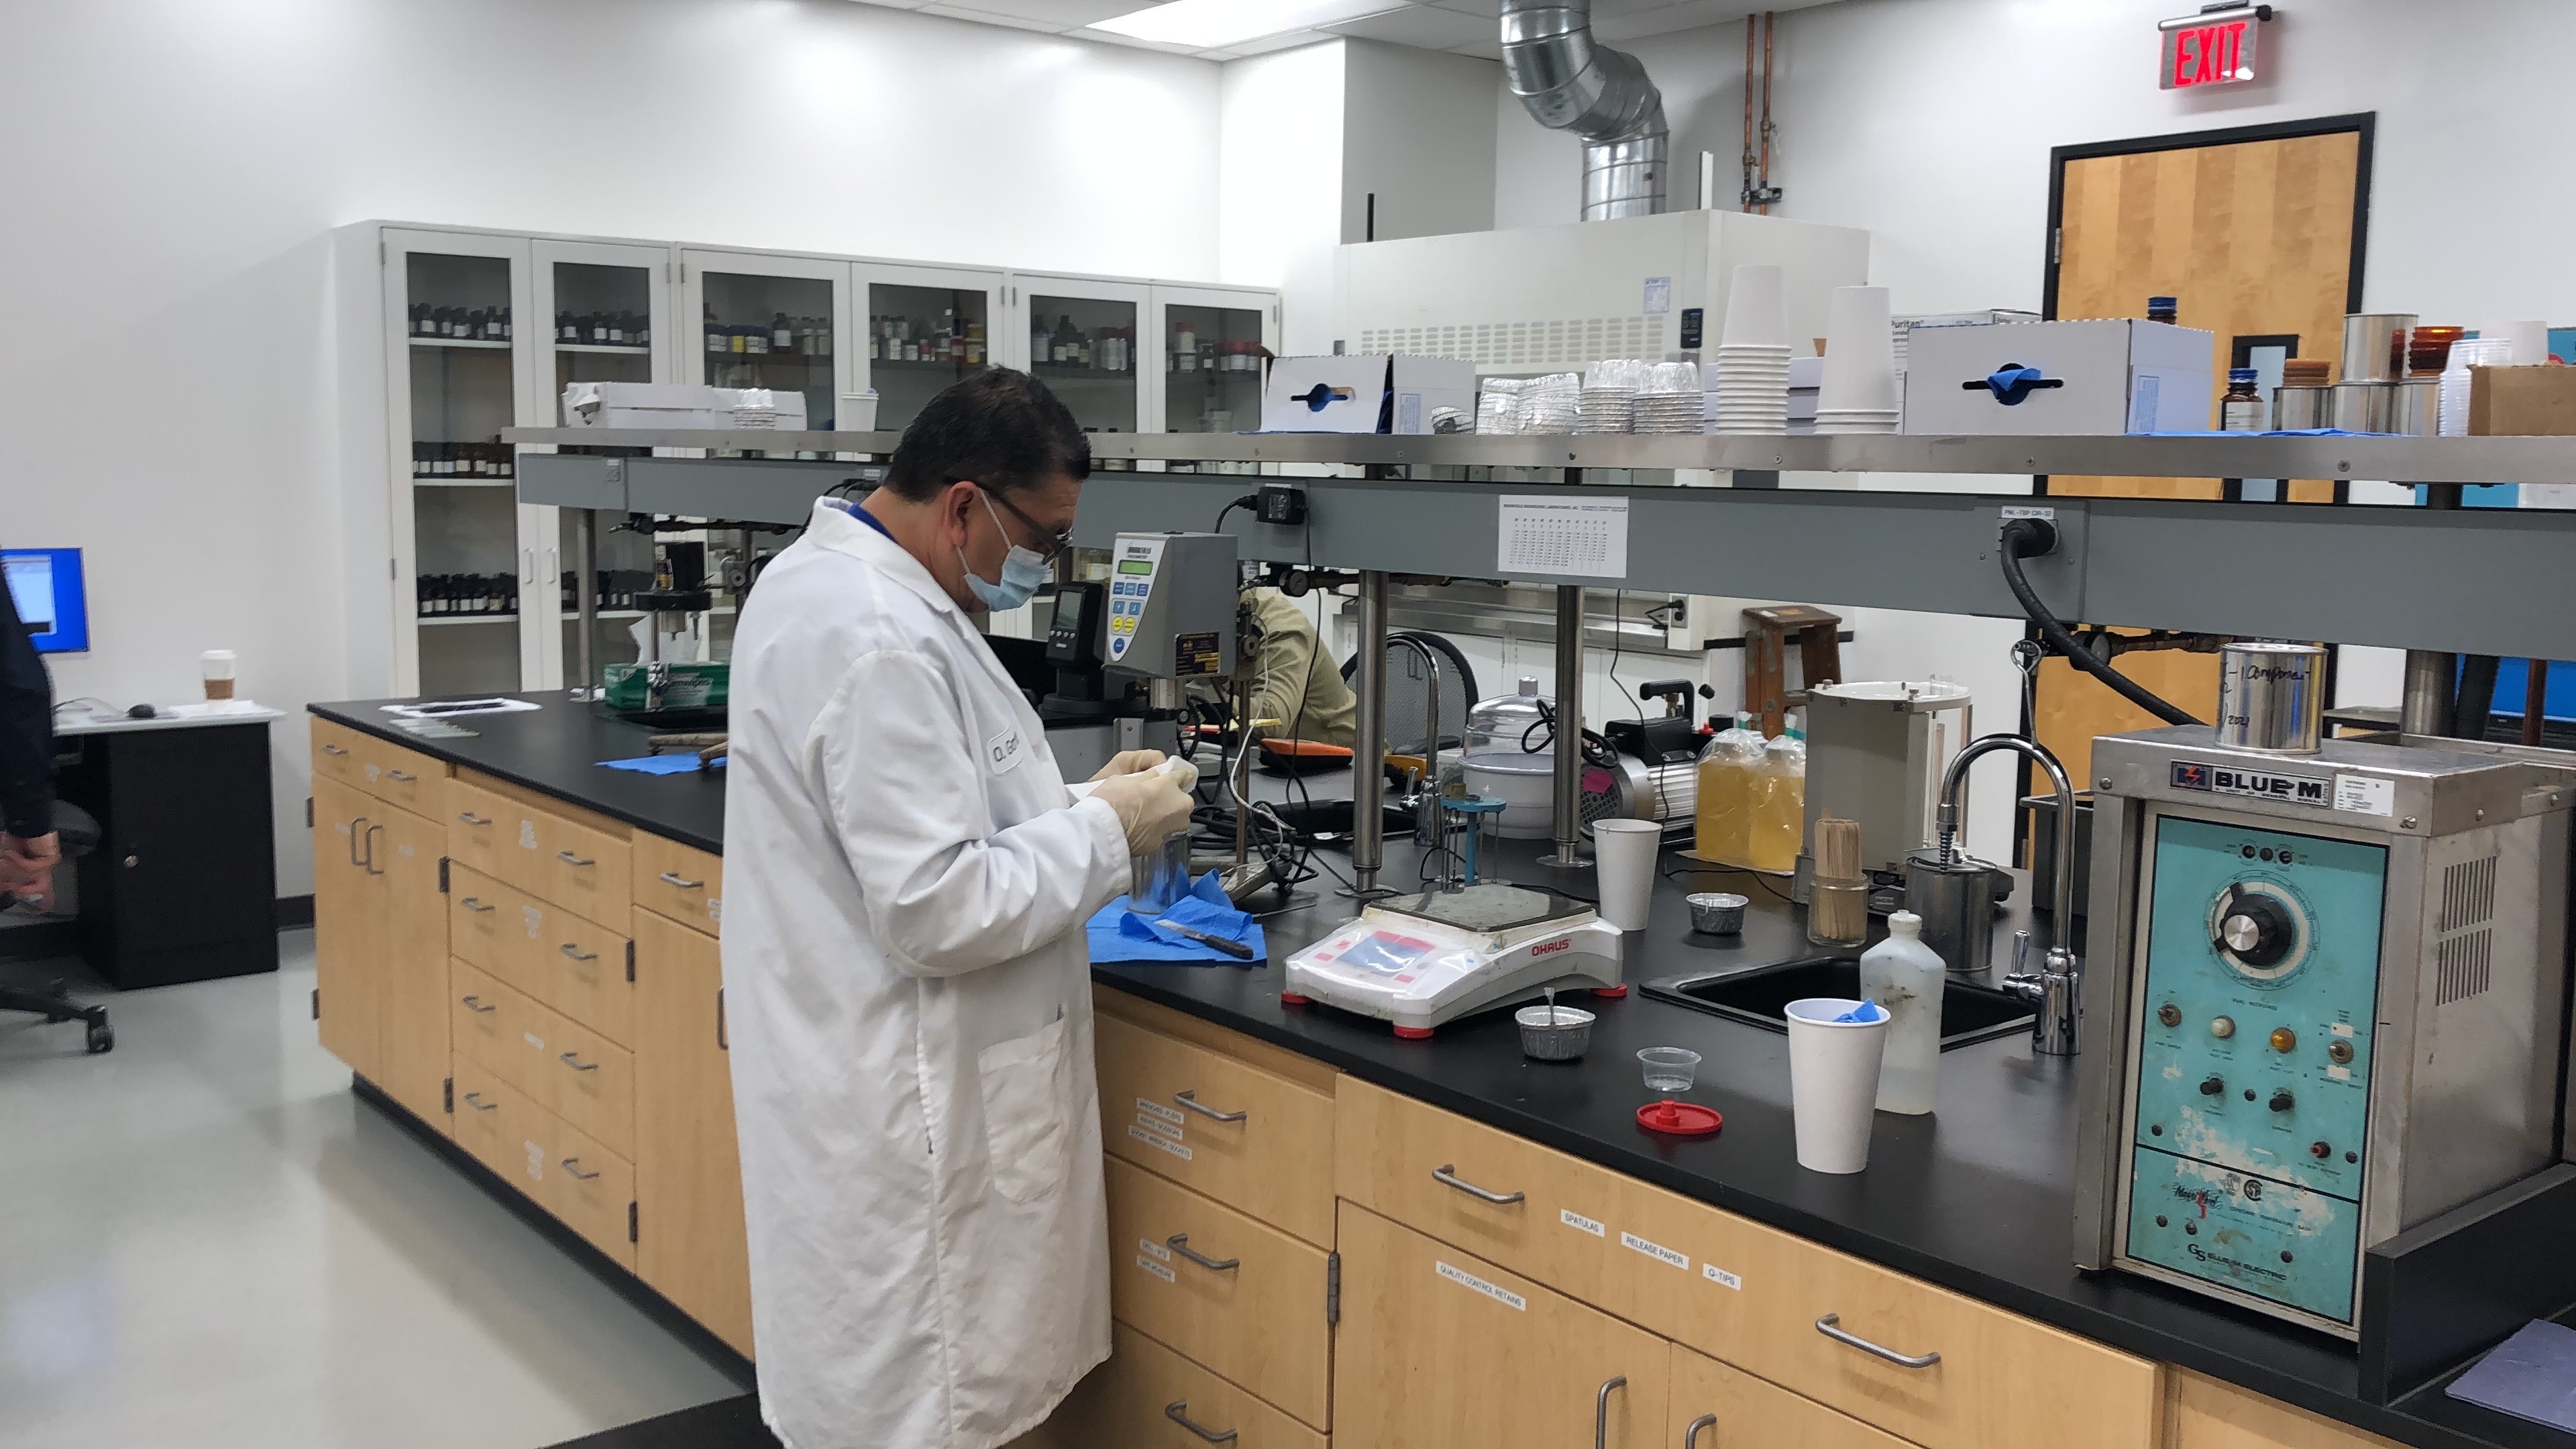 Lab with equipment